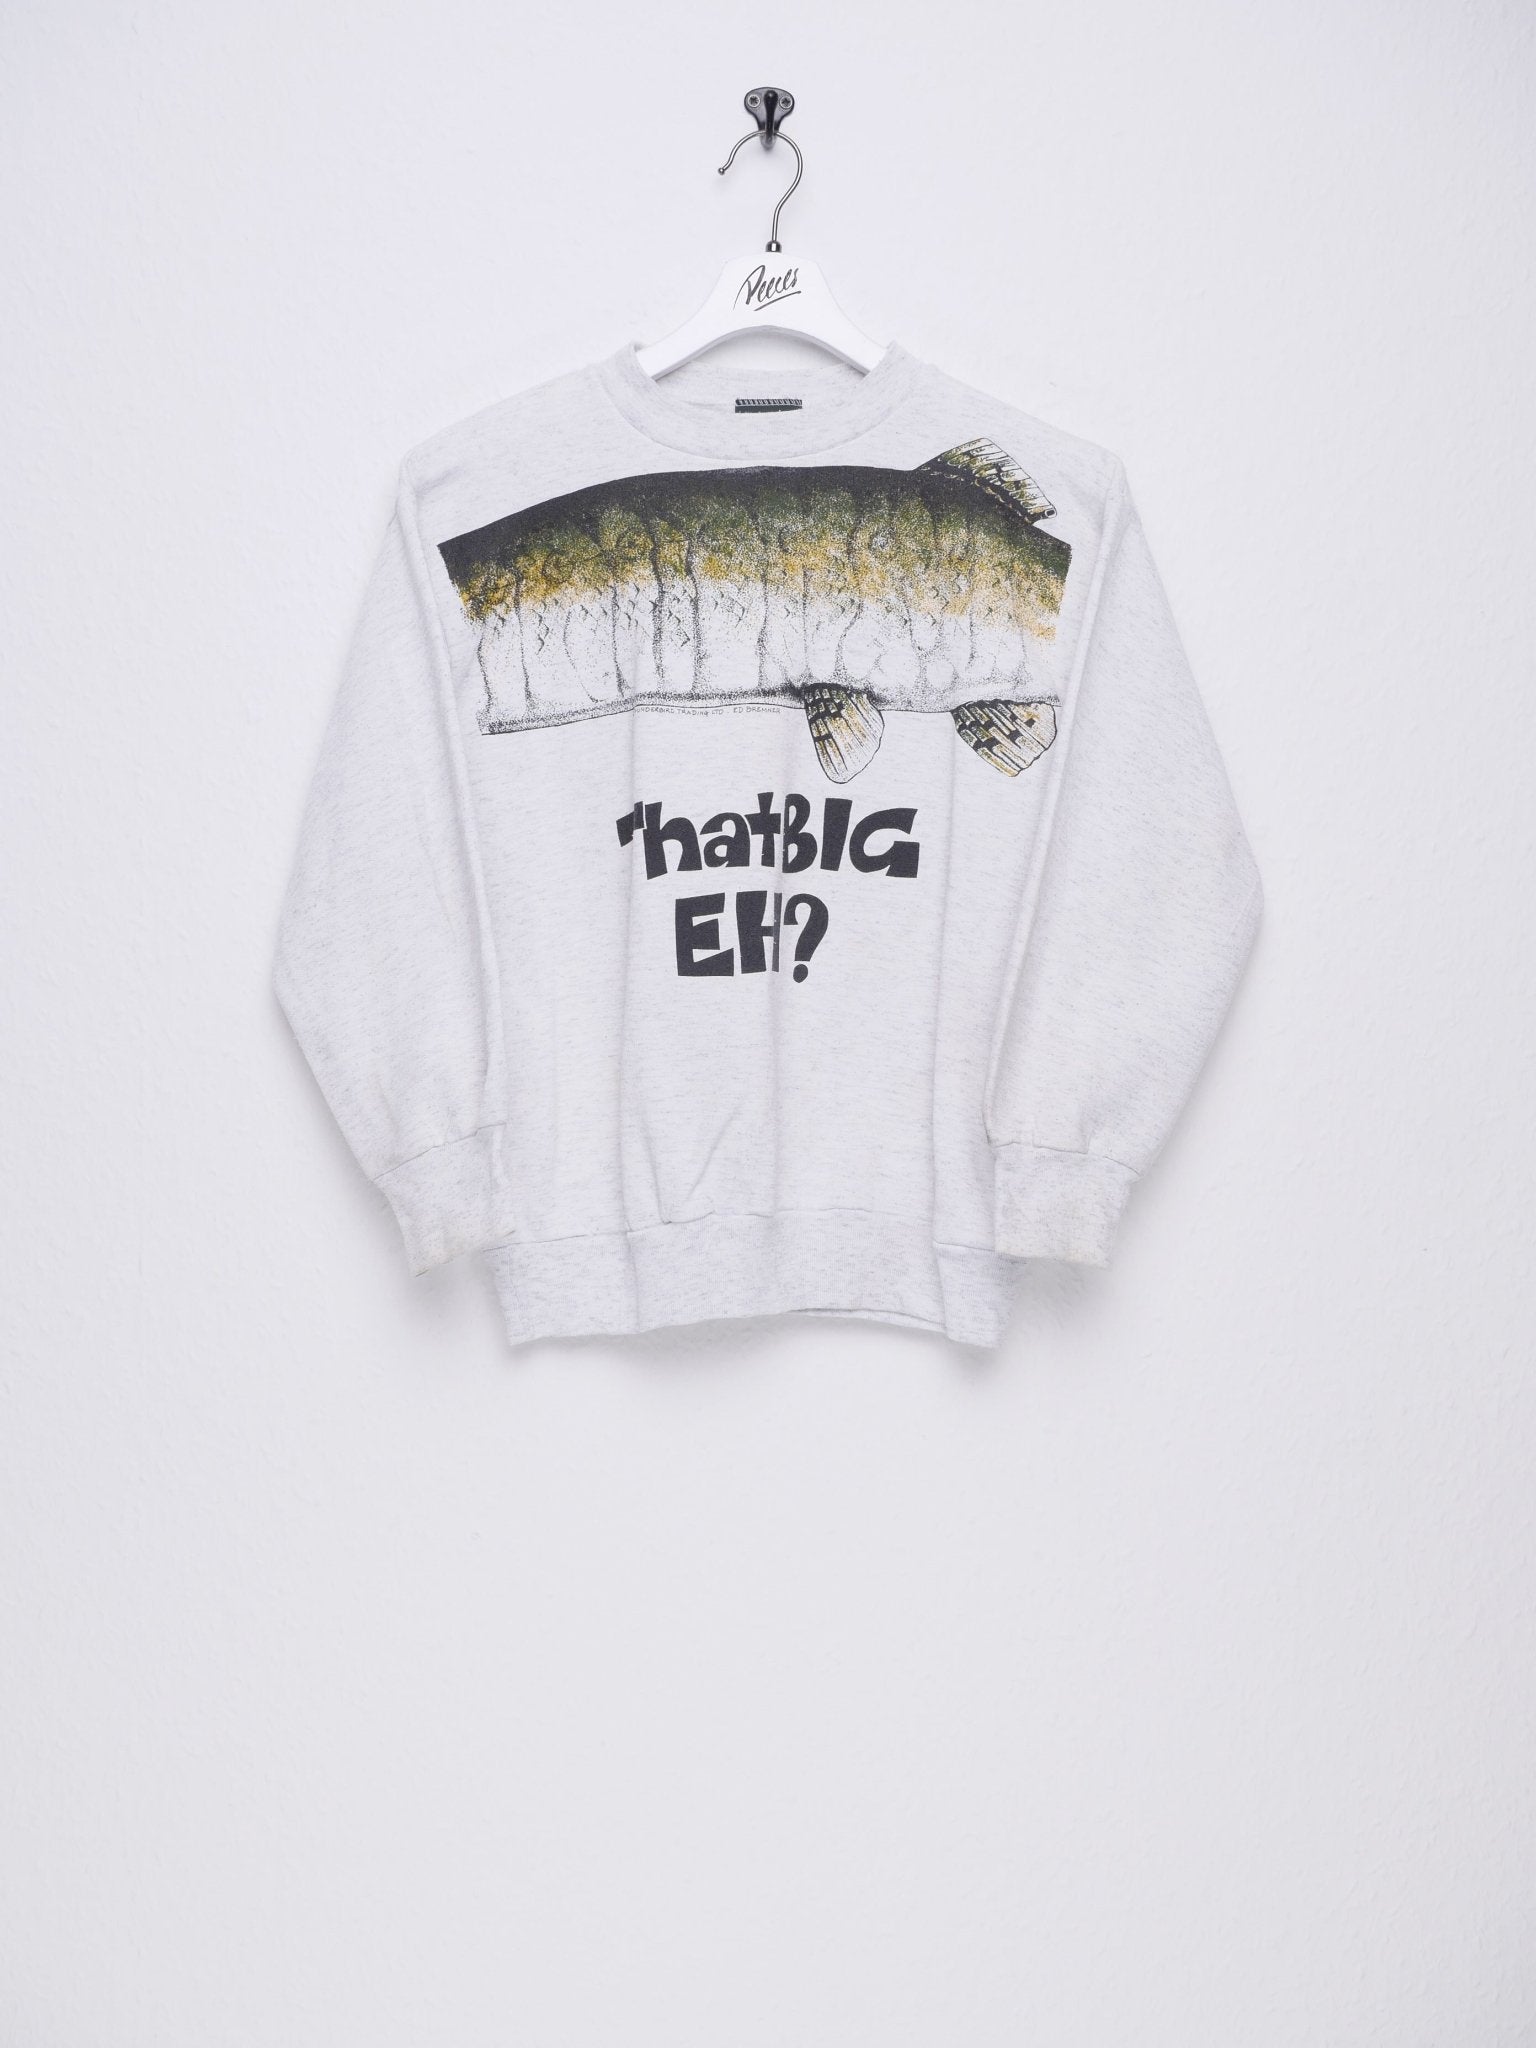 'That Big Eh?' Fish printed Graphic Sweater - Peeces